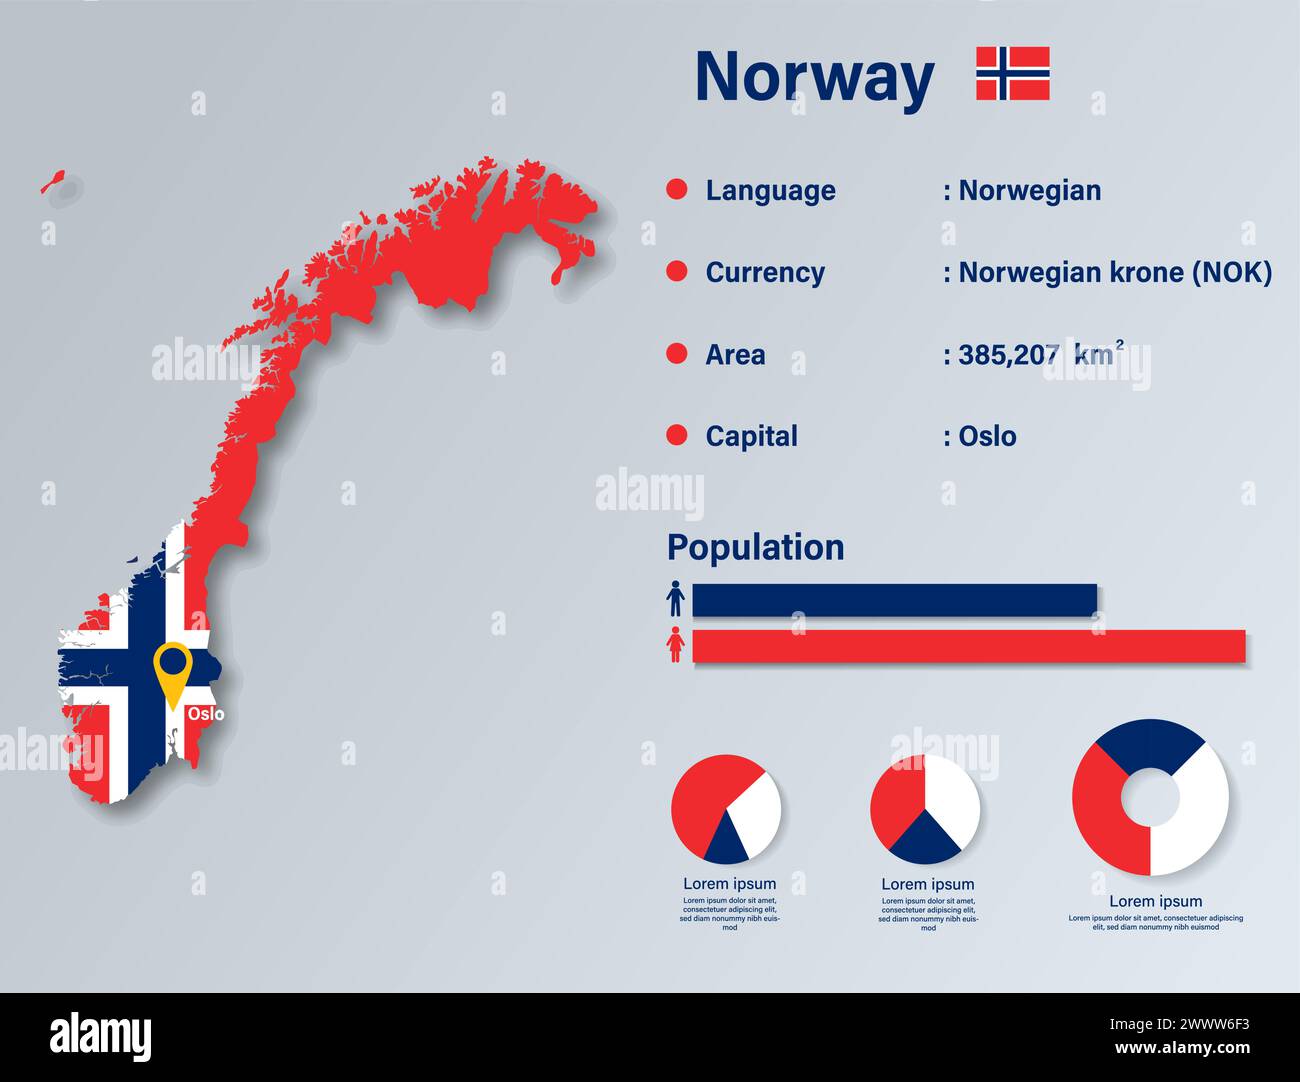 Norway Infographic Vector Illustration, Norway Statistical Data Element, Norway Information Board With Flag Map, Norway Map Flag Flat Design Stock Vector